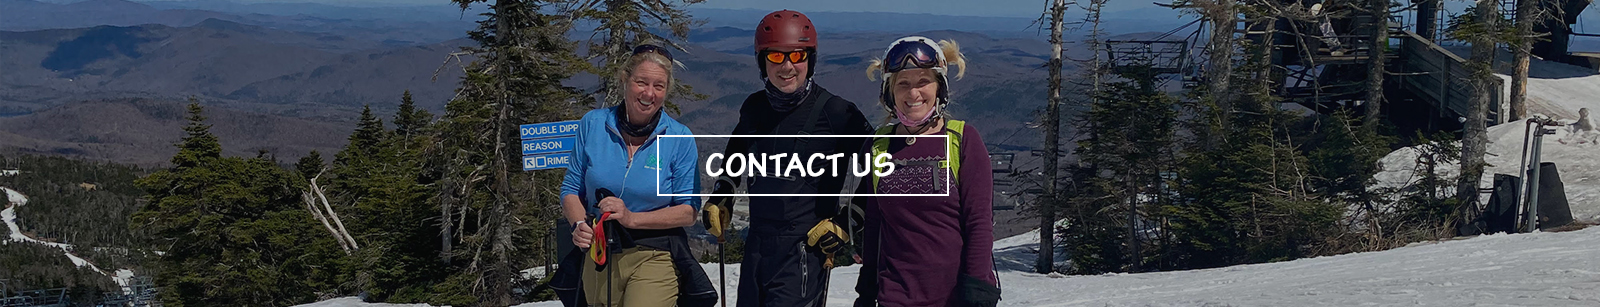 Central NJ Ski and Snowboard Club Contact Info